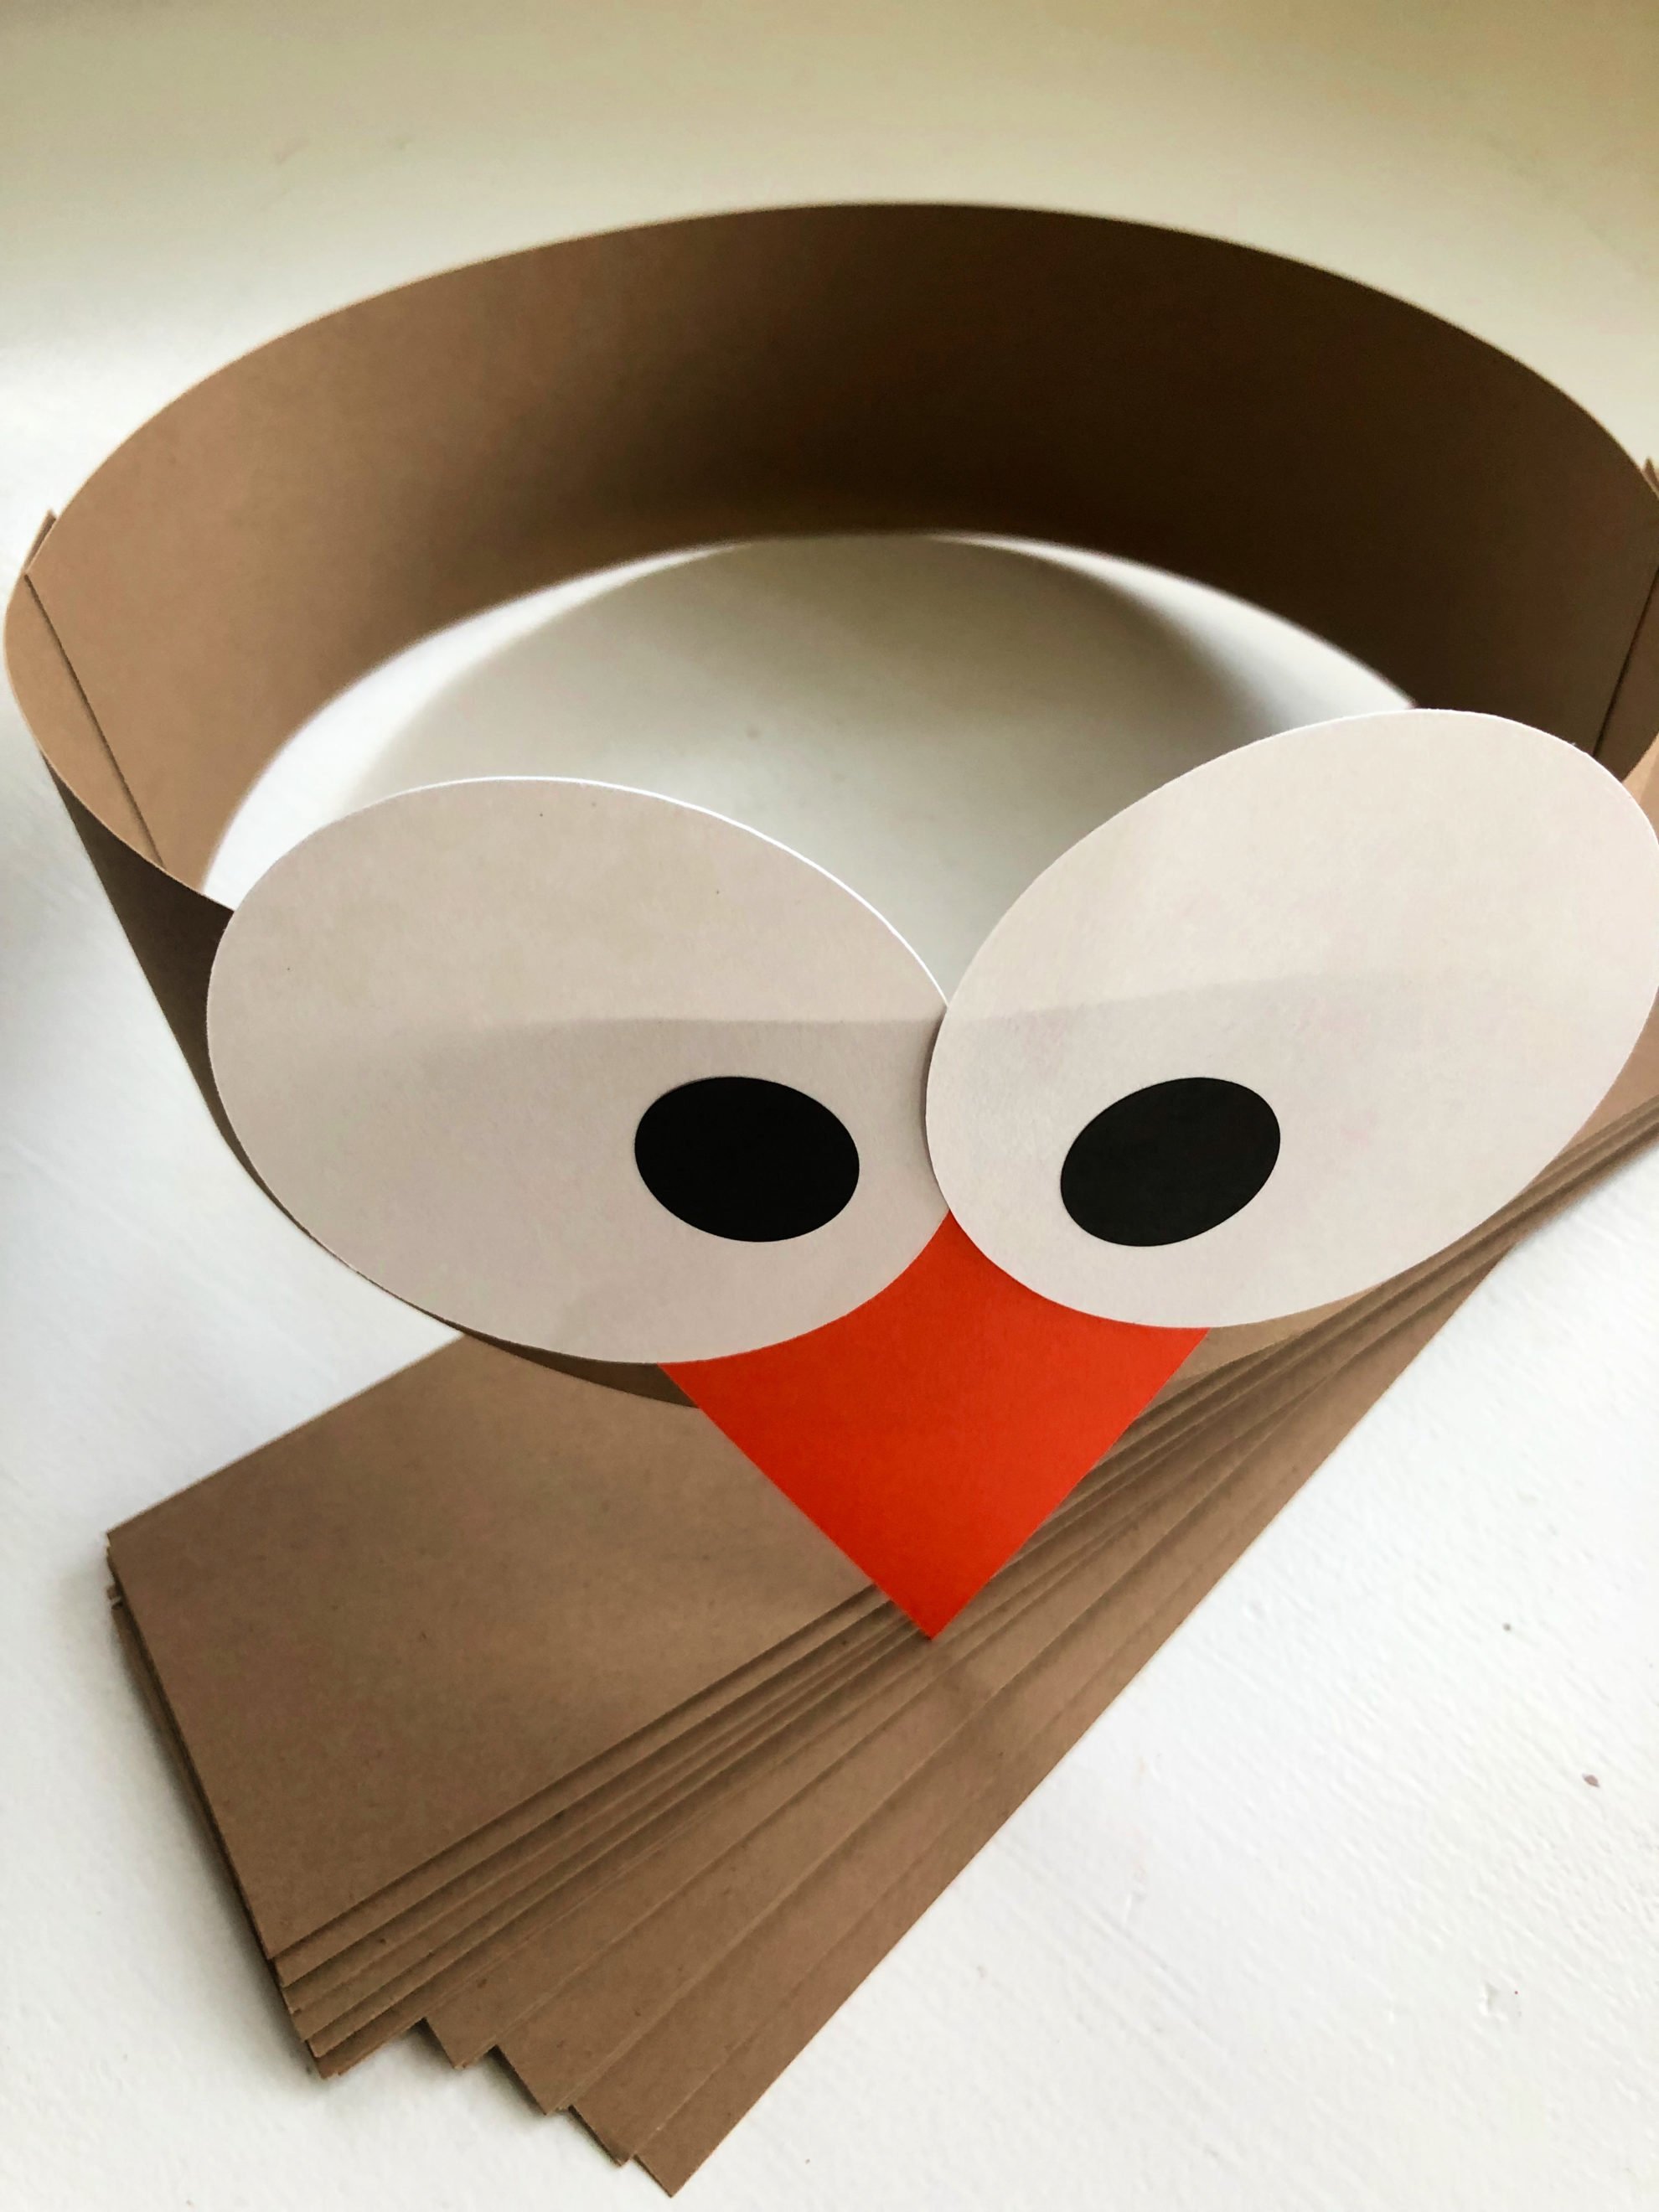 Brown paper headband with white circle and black pupil stickers with an orange triangle beak.